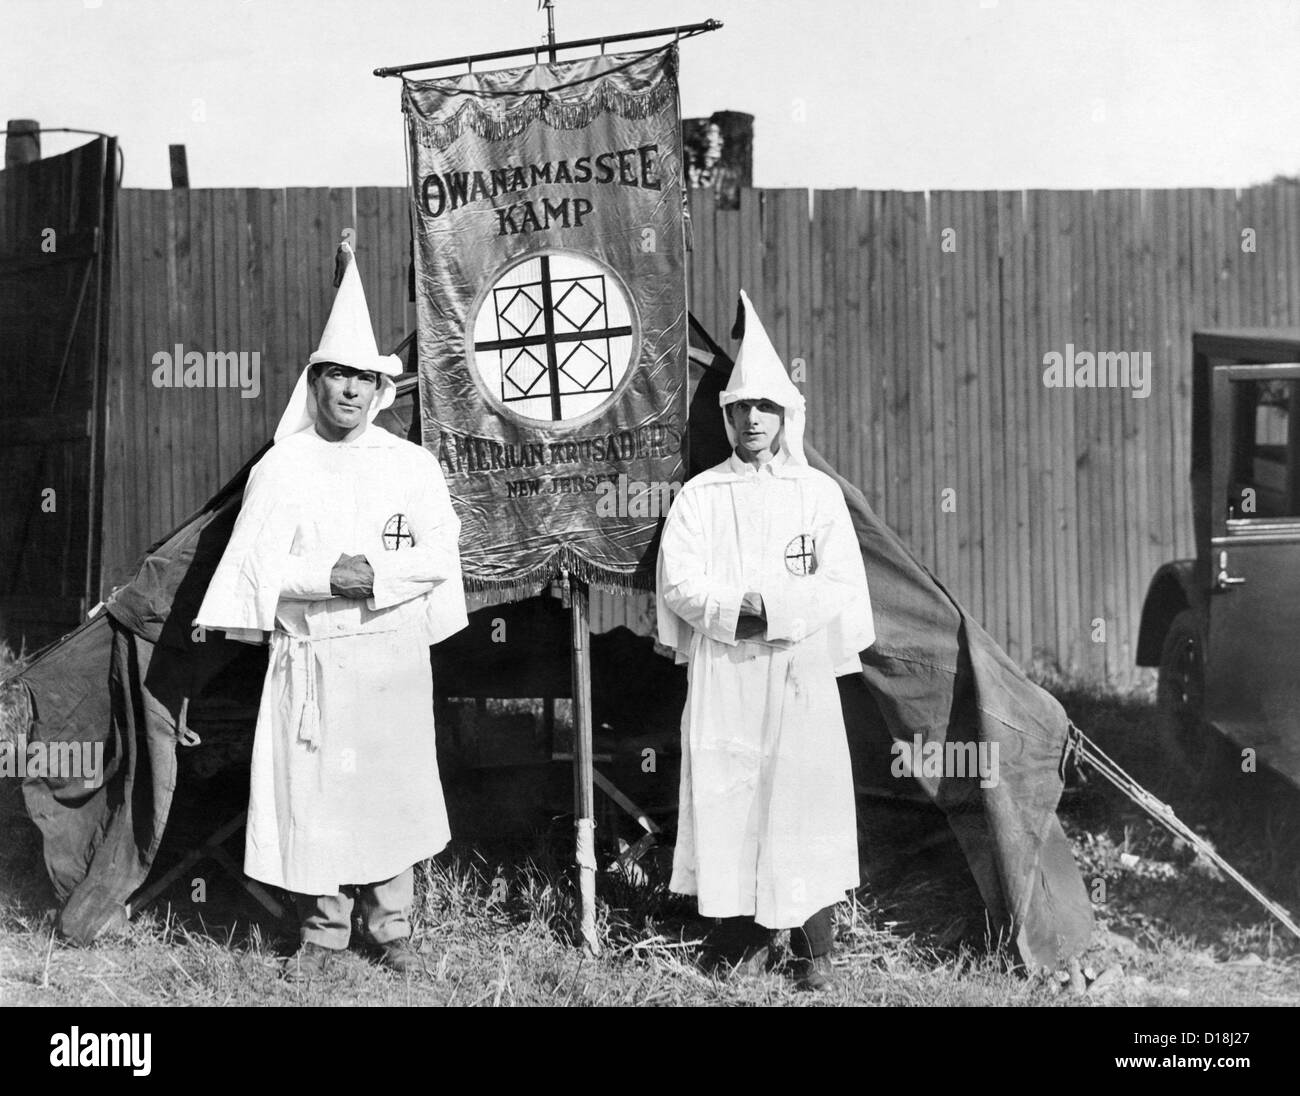 First arrivals of the Ku Klux Klan have set up their tent on the outskirts of Washington, DC. They will hold their annual Stock Photo